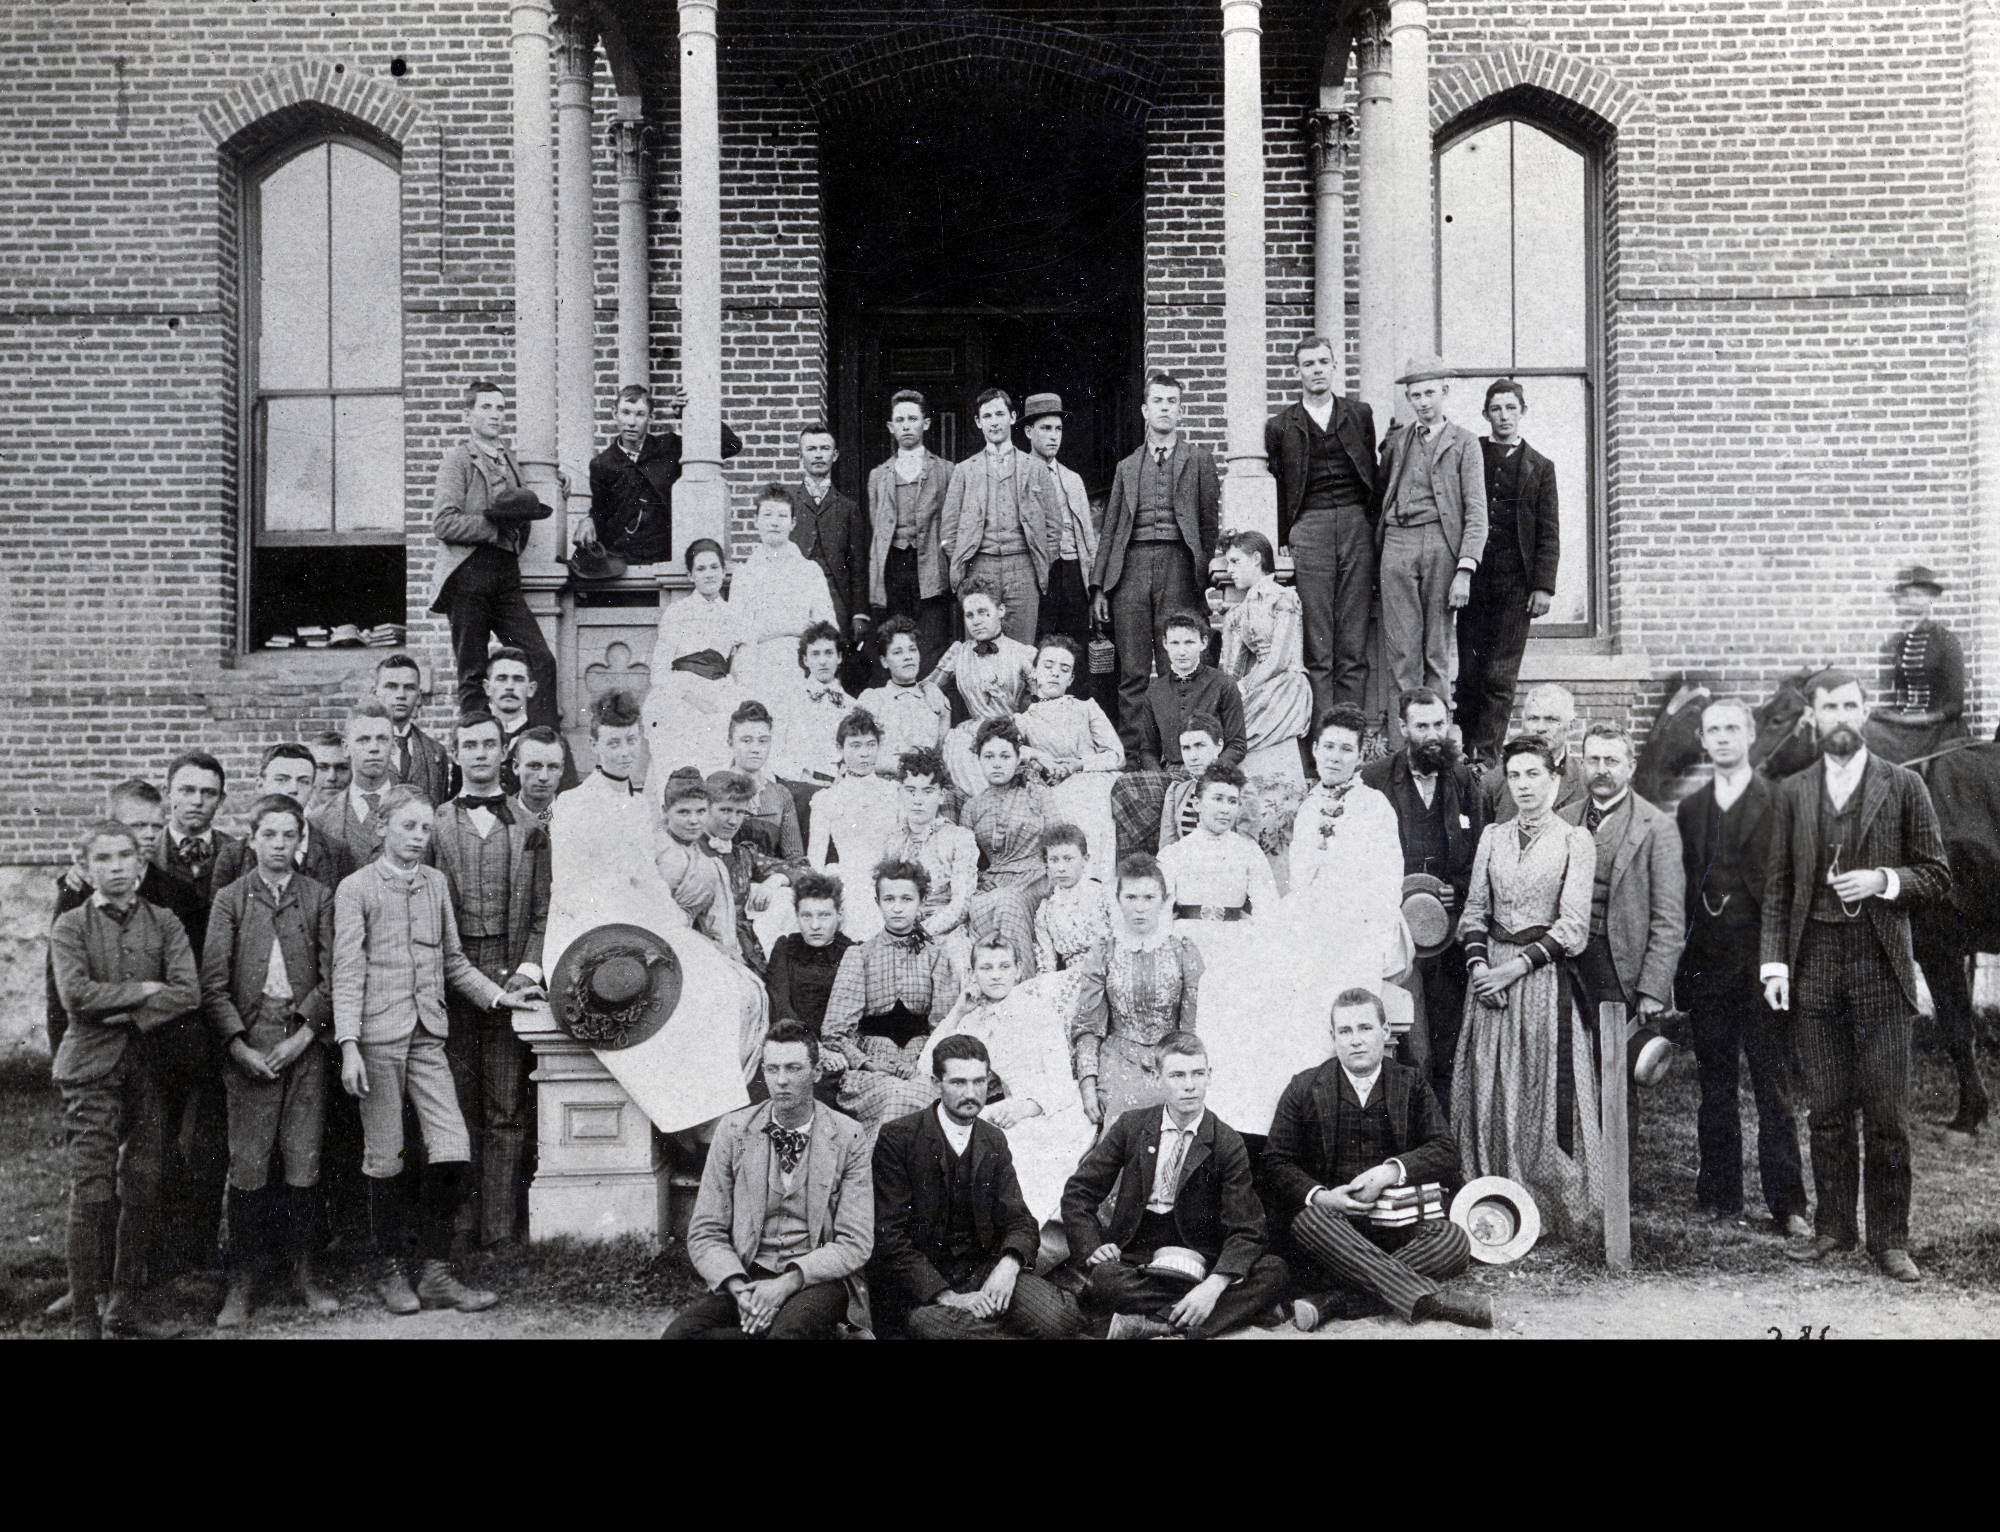 A black and white photo of Chaffey students in 1890.